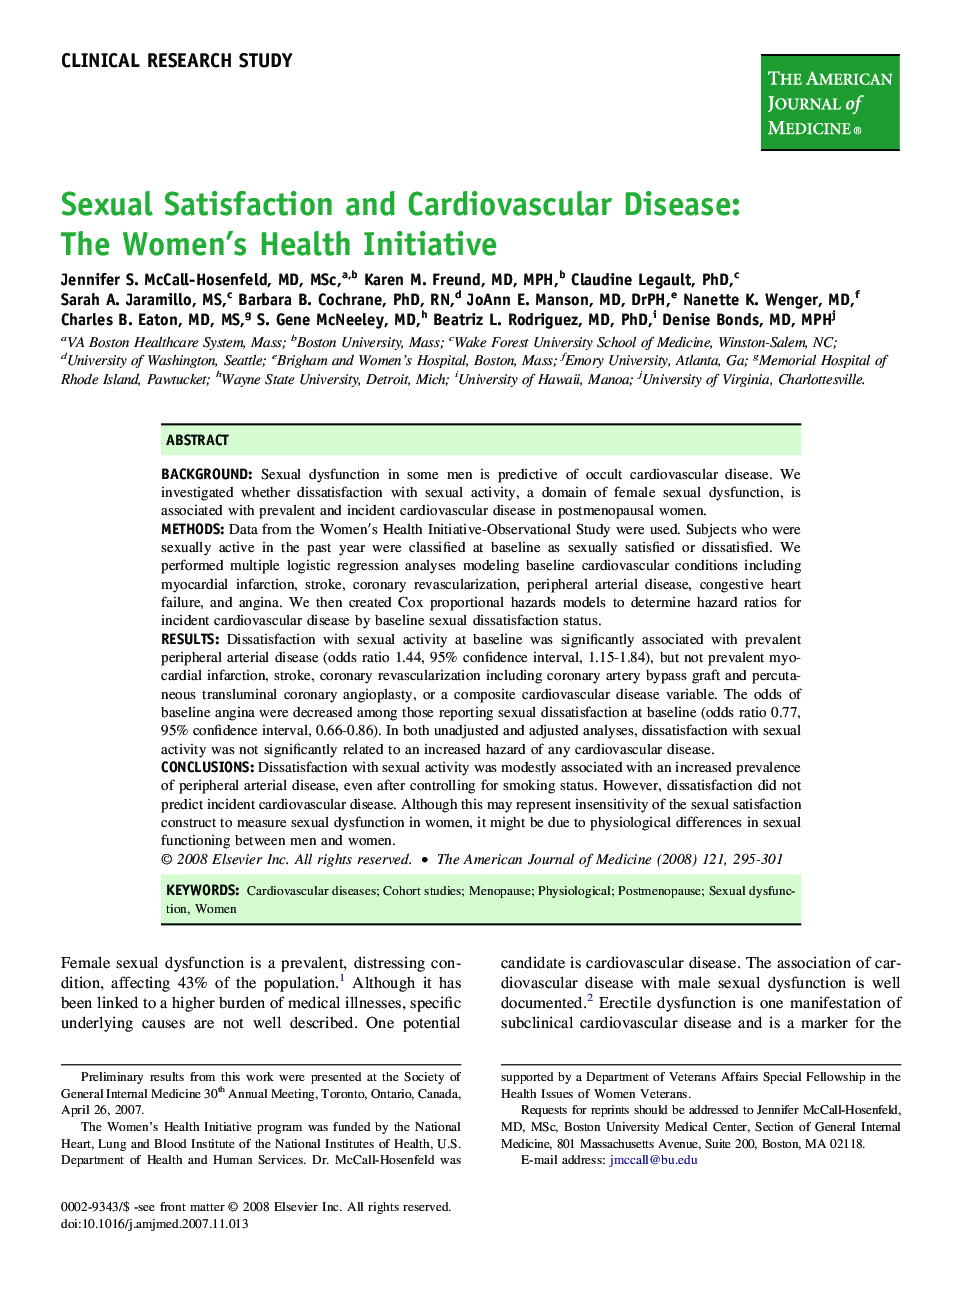 Sexual Satisfaction and Cardiovascular Disease: The Women’s Health Initiative 